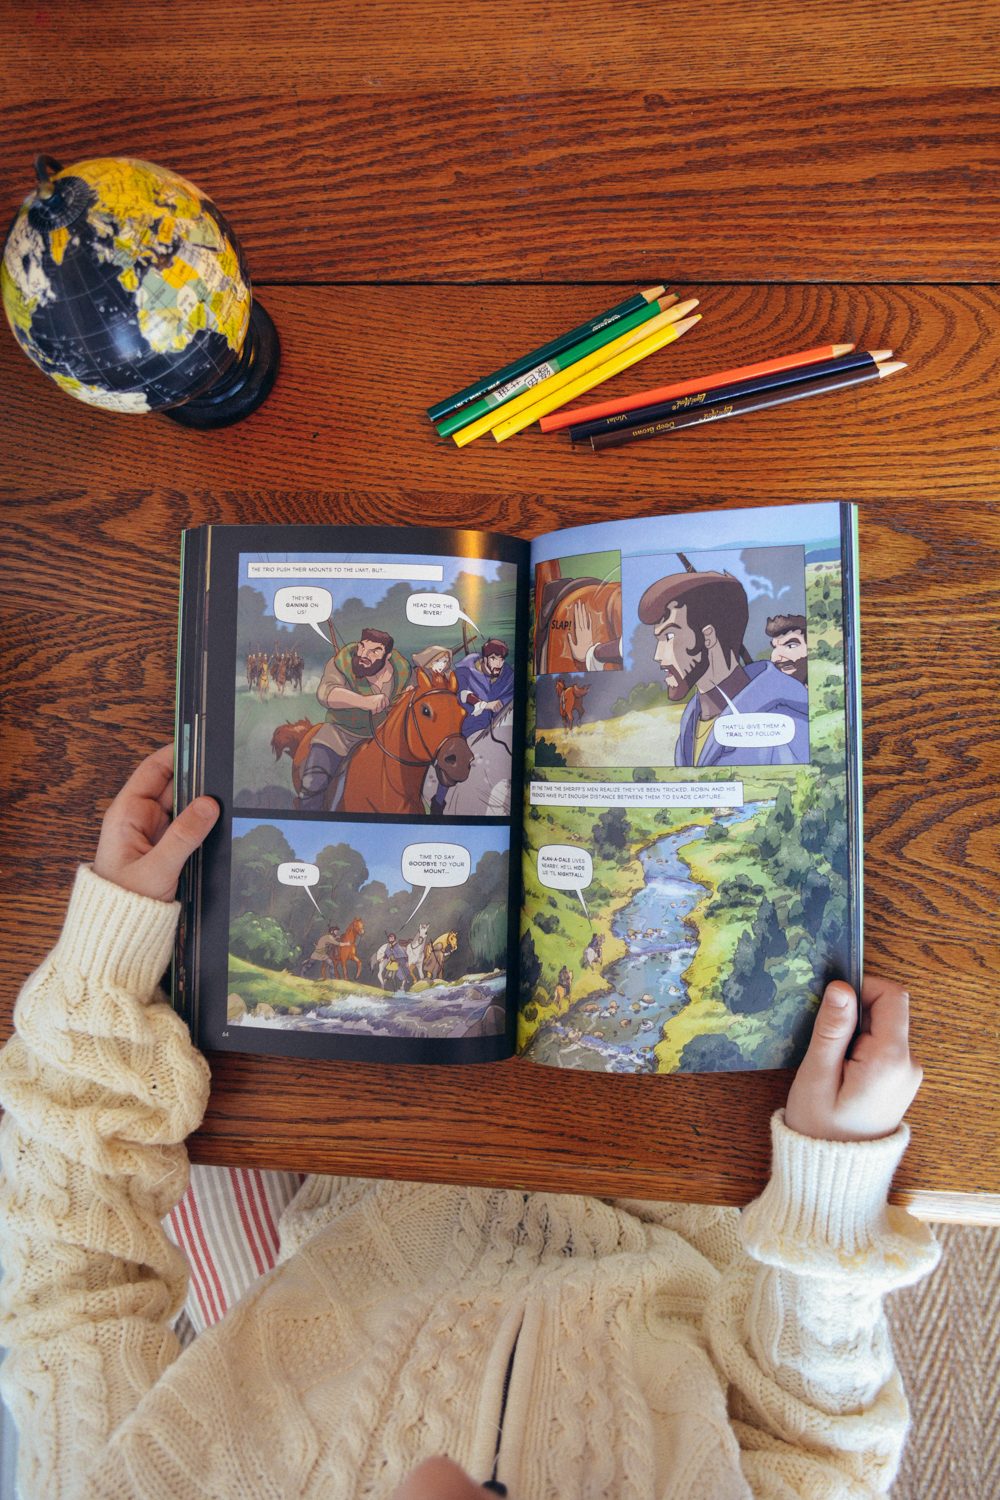 Using Graphic Novels (like Robin Hood!) in your Homeschool: A Timberdoodle Review